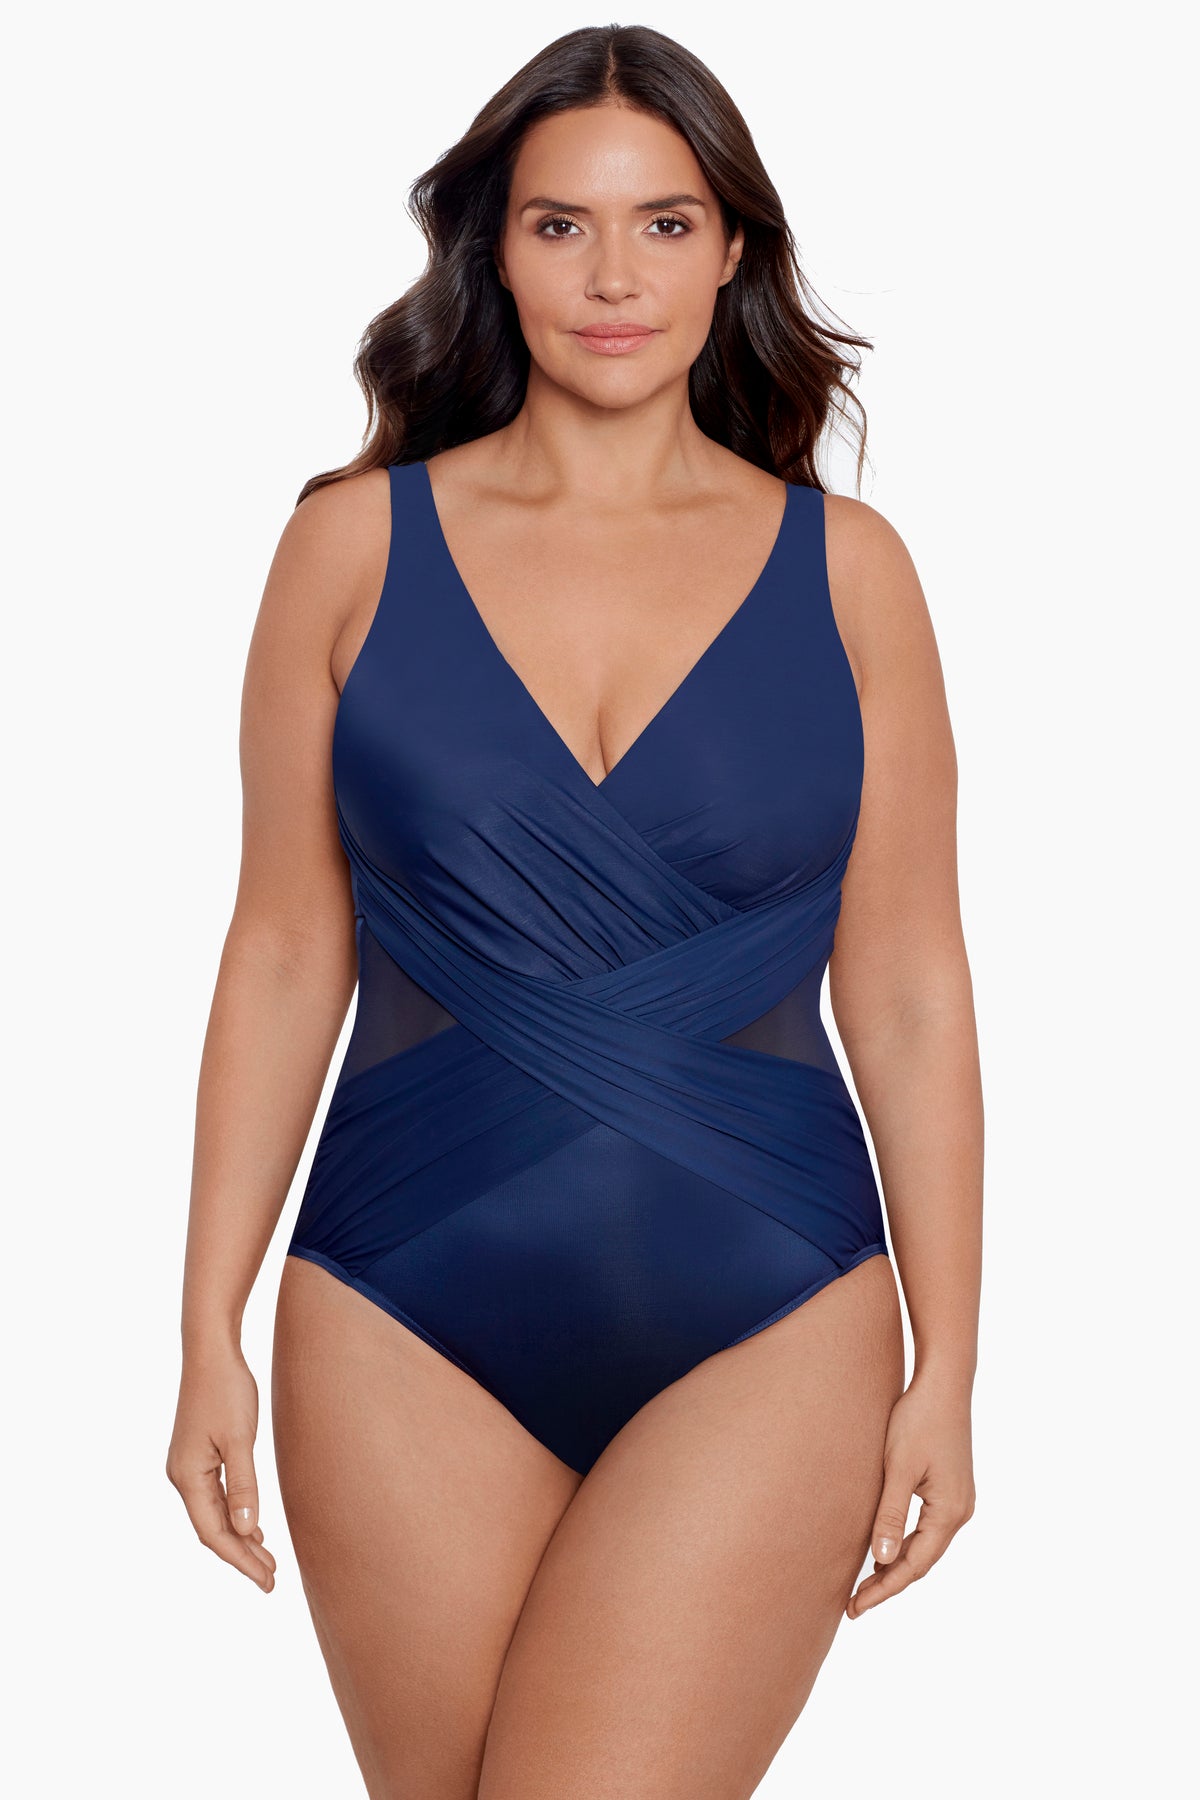 Bathing Suit For Large Bustplus Size Tummy Control Swimsuit For